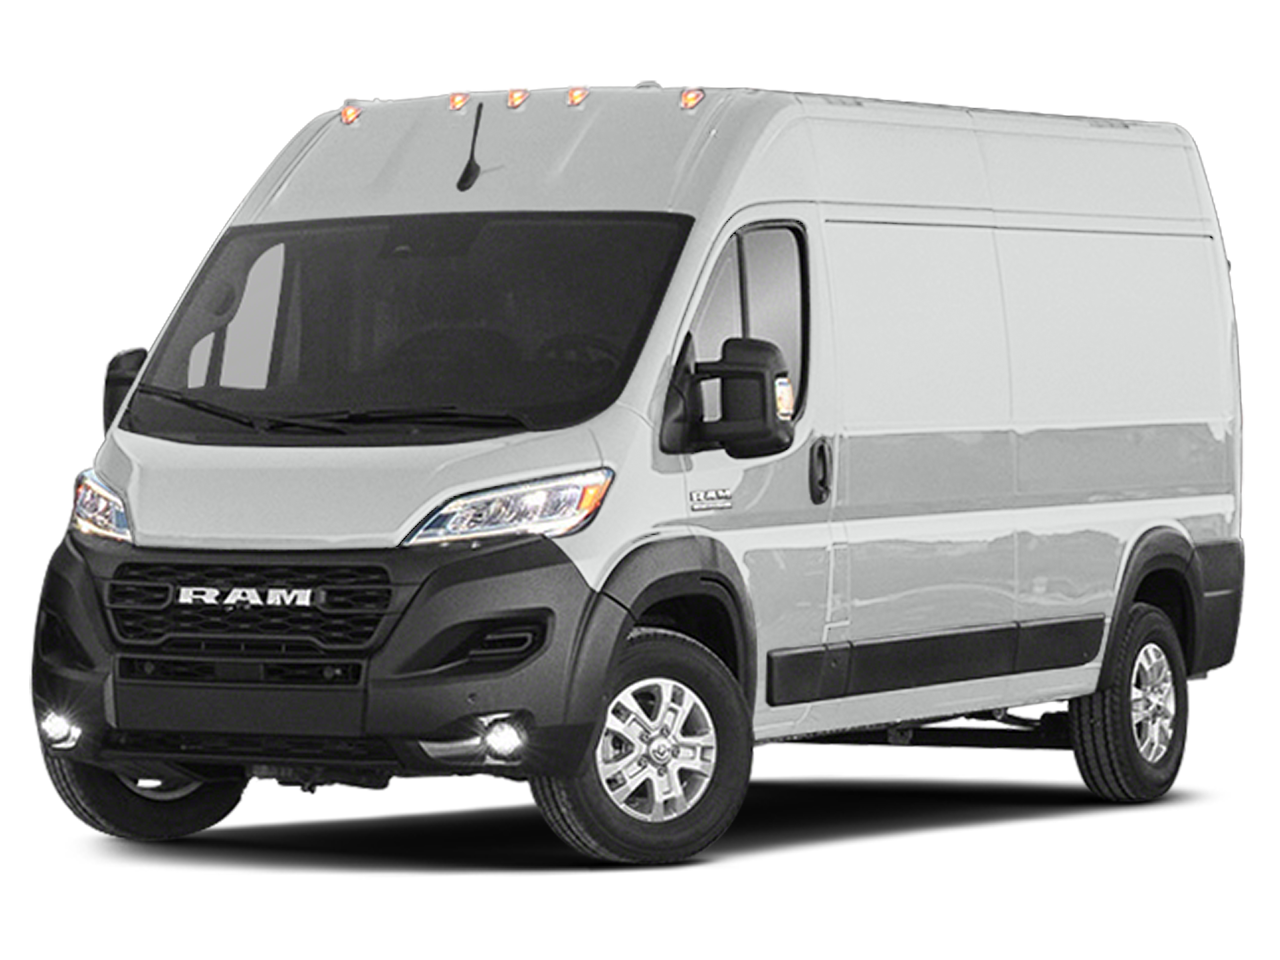 2023 RAM ProMaster 1500 Cargo Van HIGH ROOF 136' WB in Bright White  Clearcoat for Sale - Glendale, CA | Glendale Dodge Chrysler Jeep